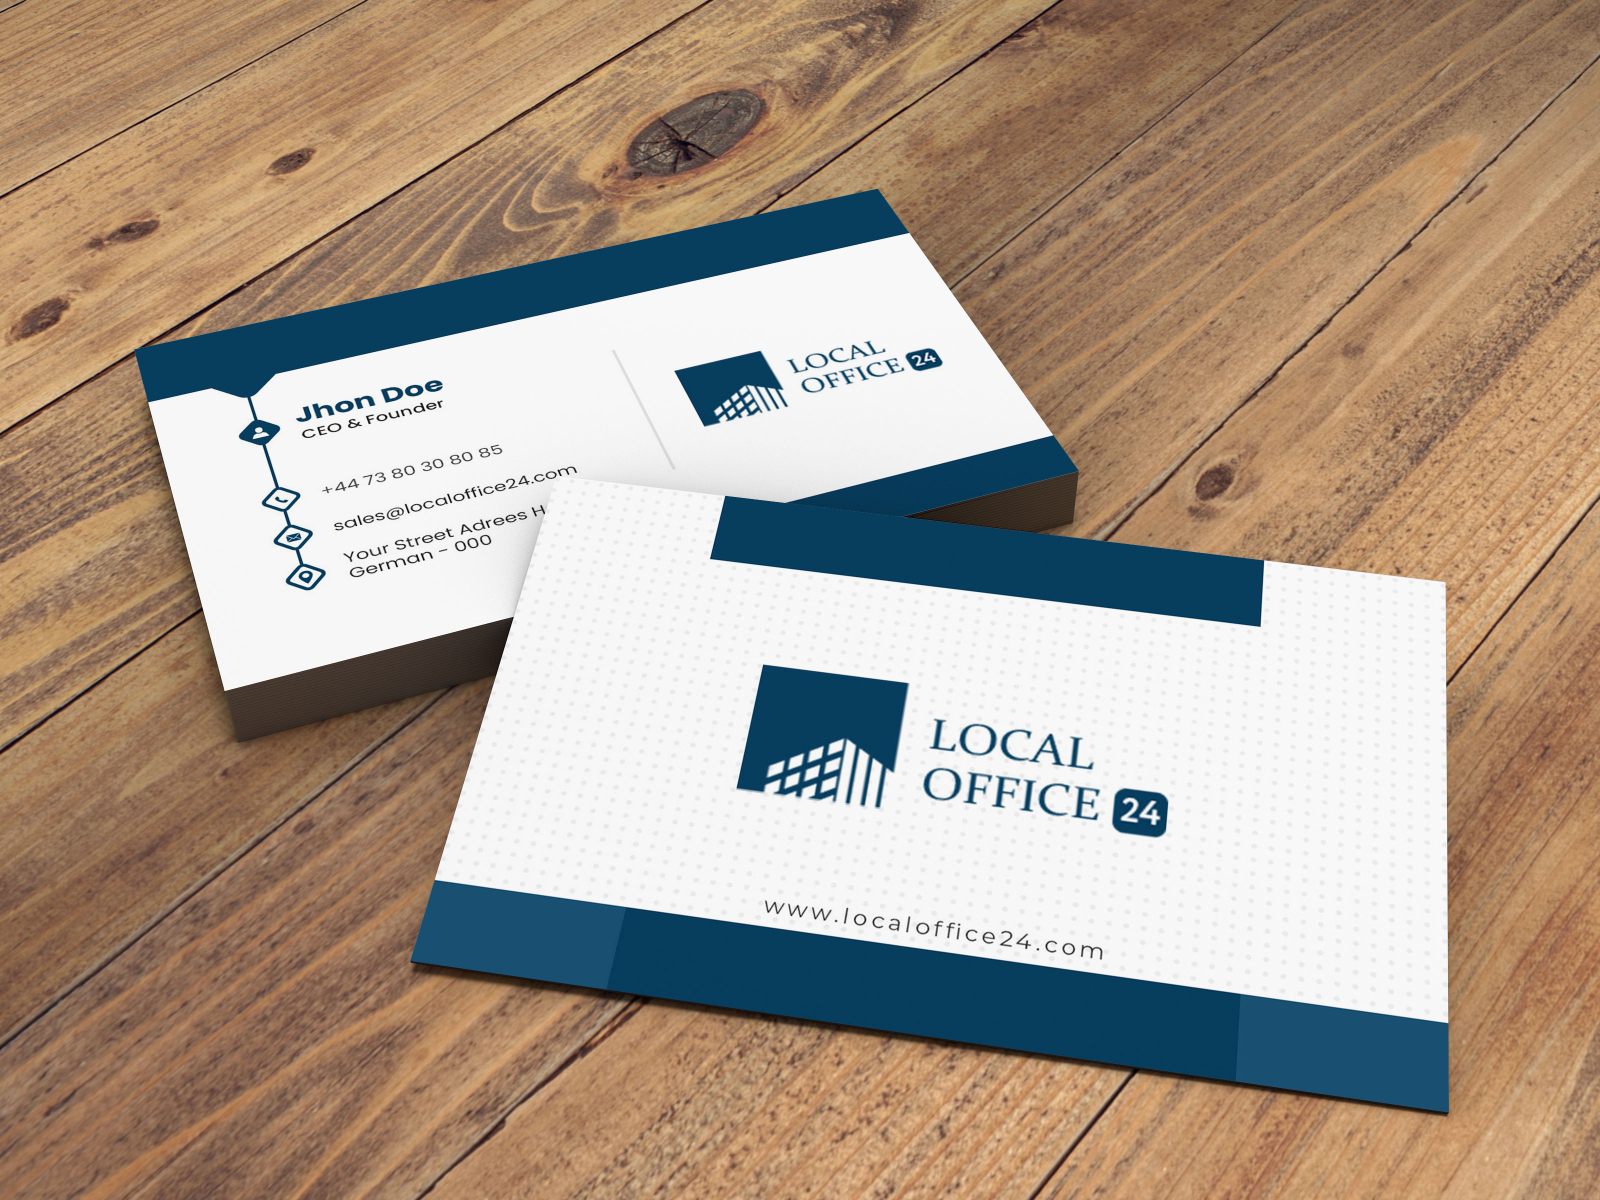 BUSINESS Card Design Professionally- Mockup - Vol8 by Build Visible on ...